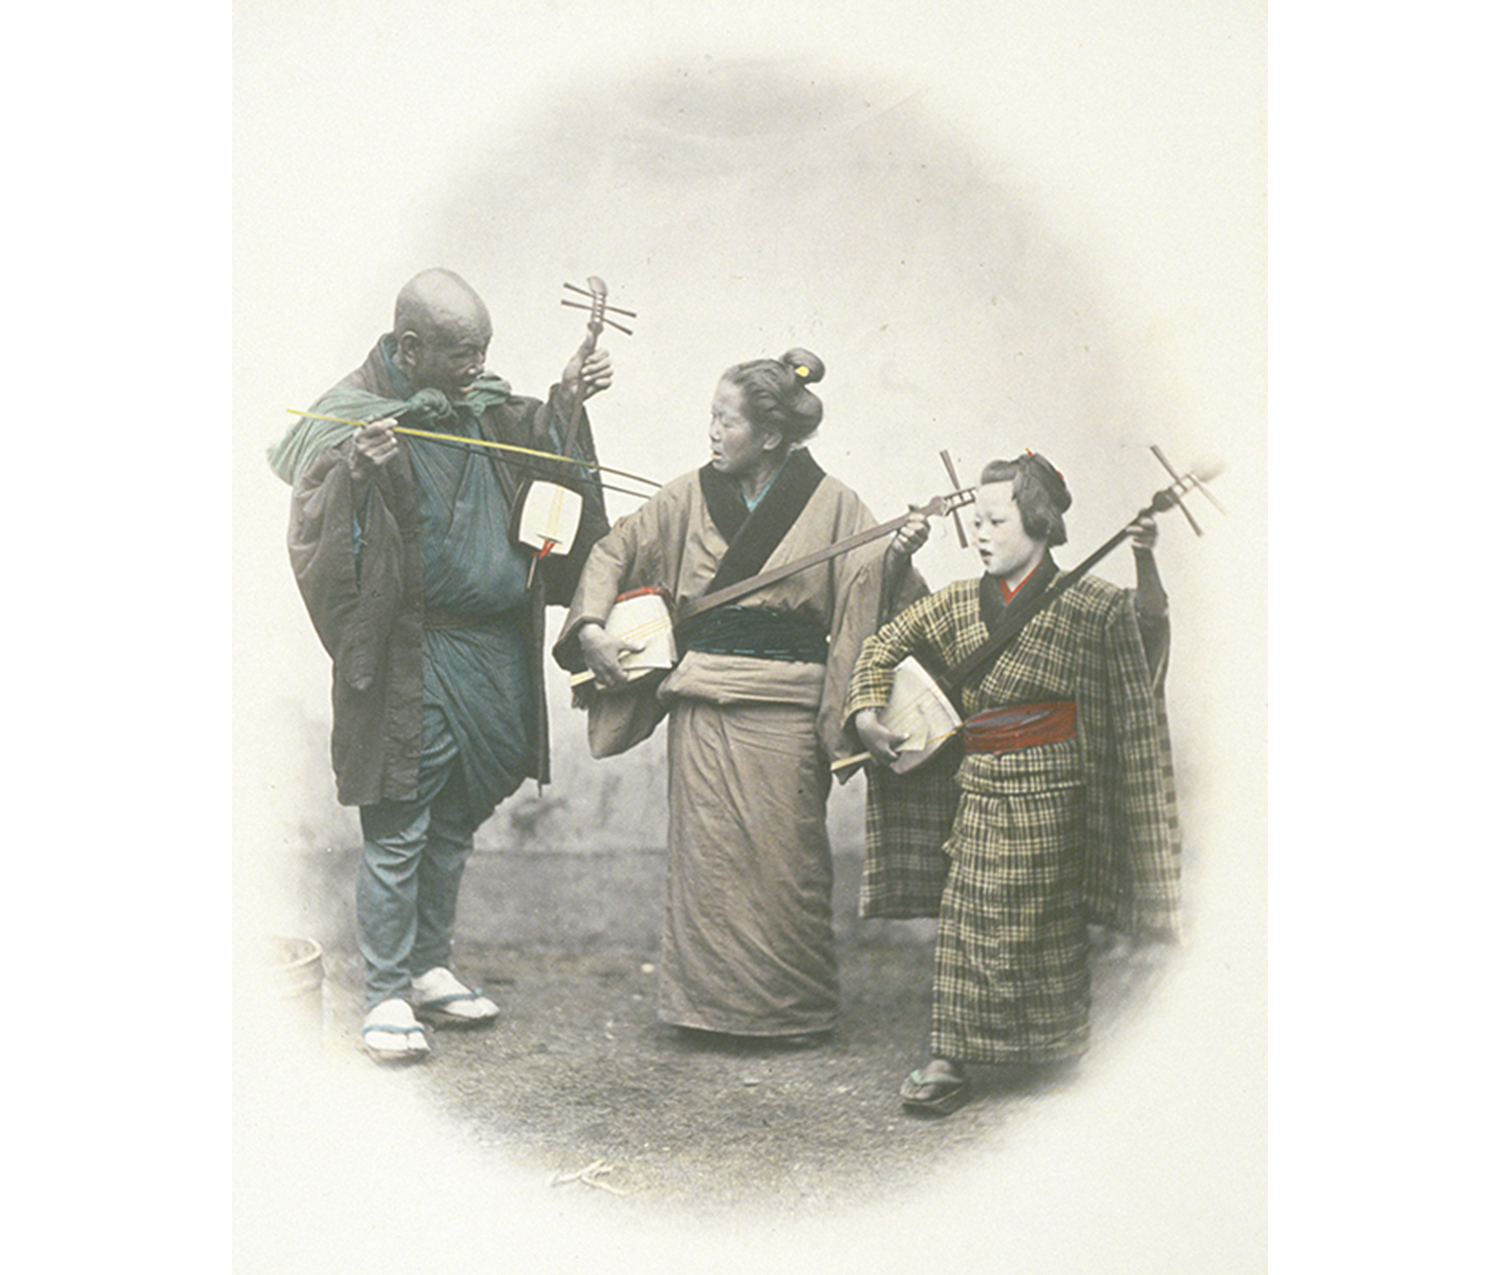 three musicians in shabby traditional Japanese clothing; an older man and woman and a young girl playing string instruments (Shamisen)